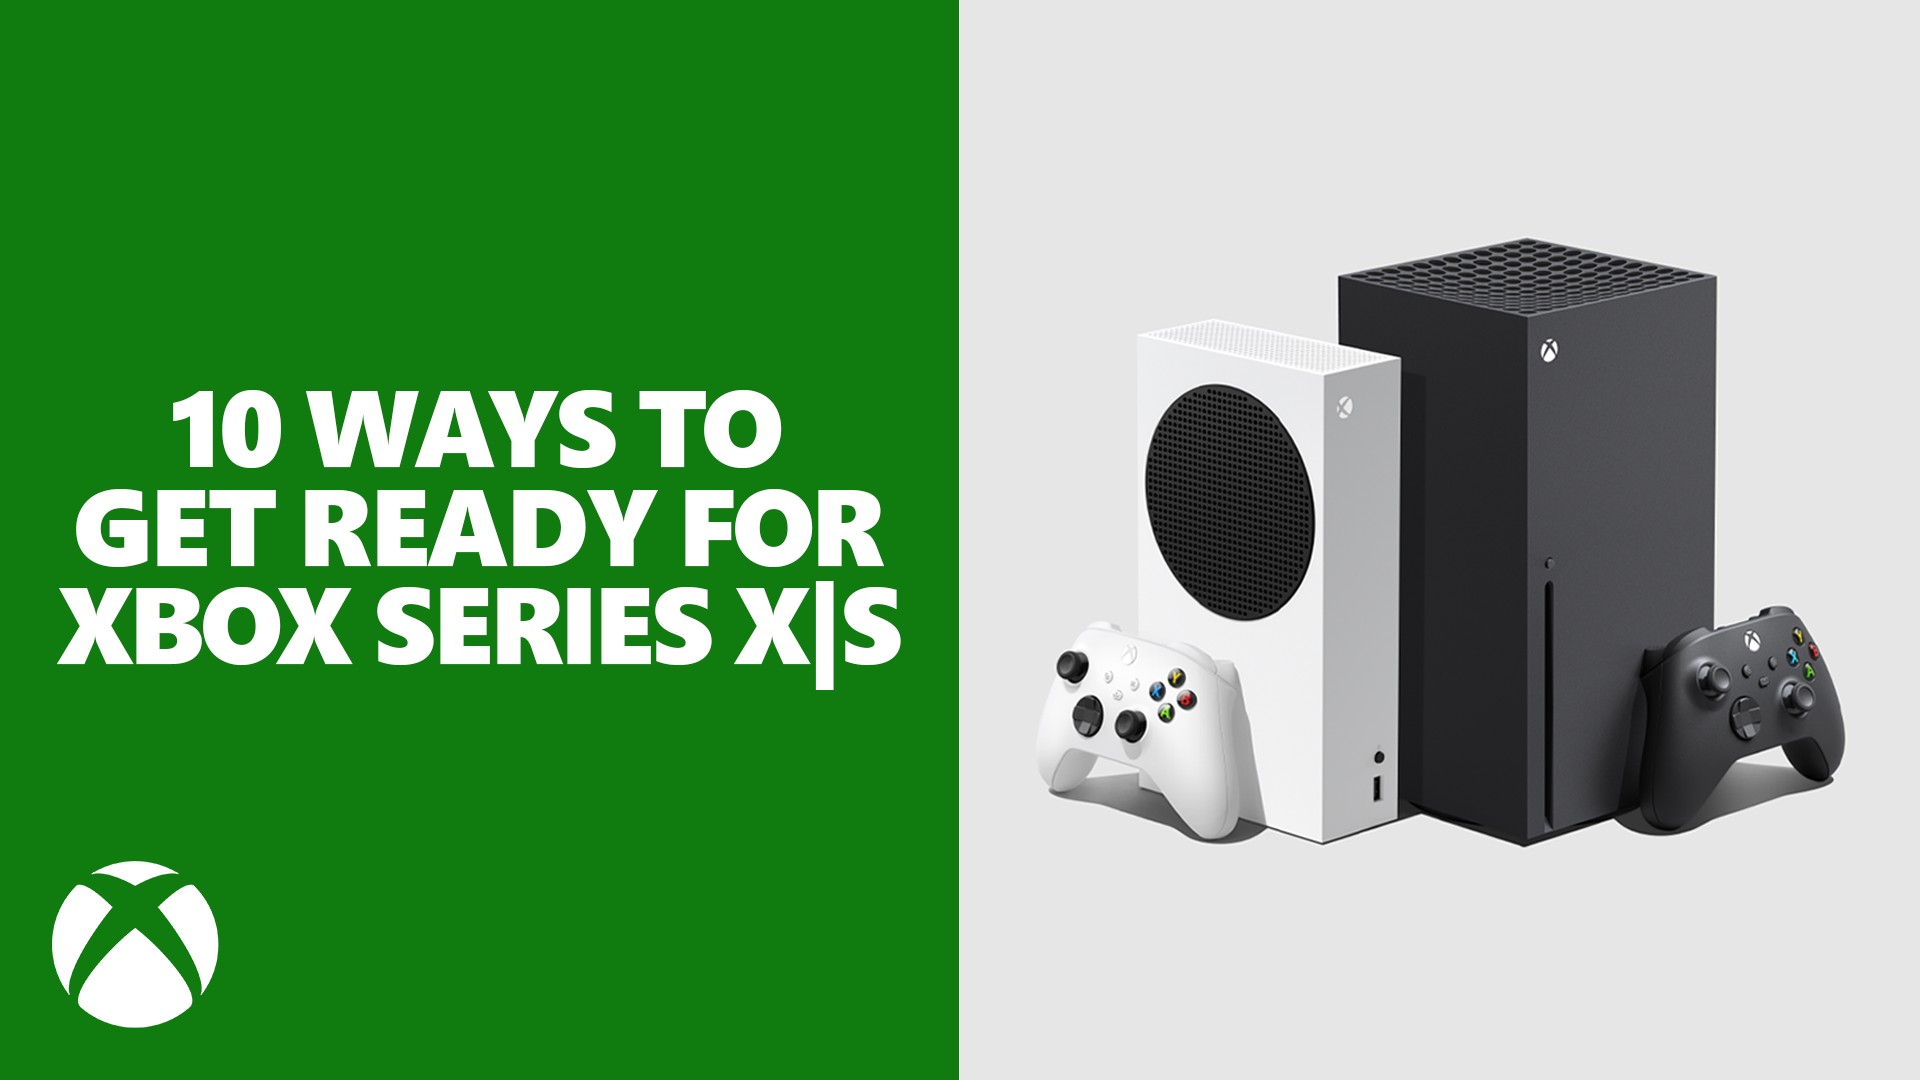 10 Ways to Get Ready for Xbox Series X|S